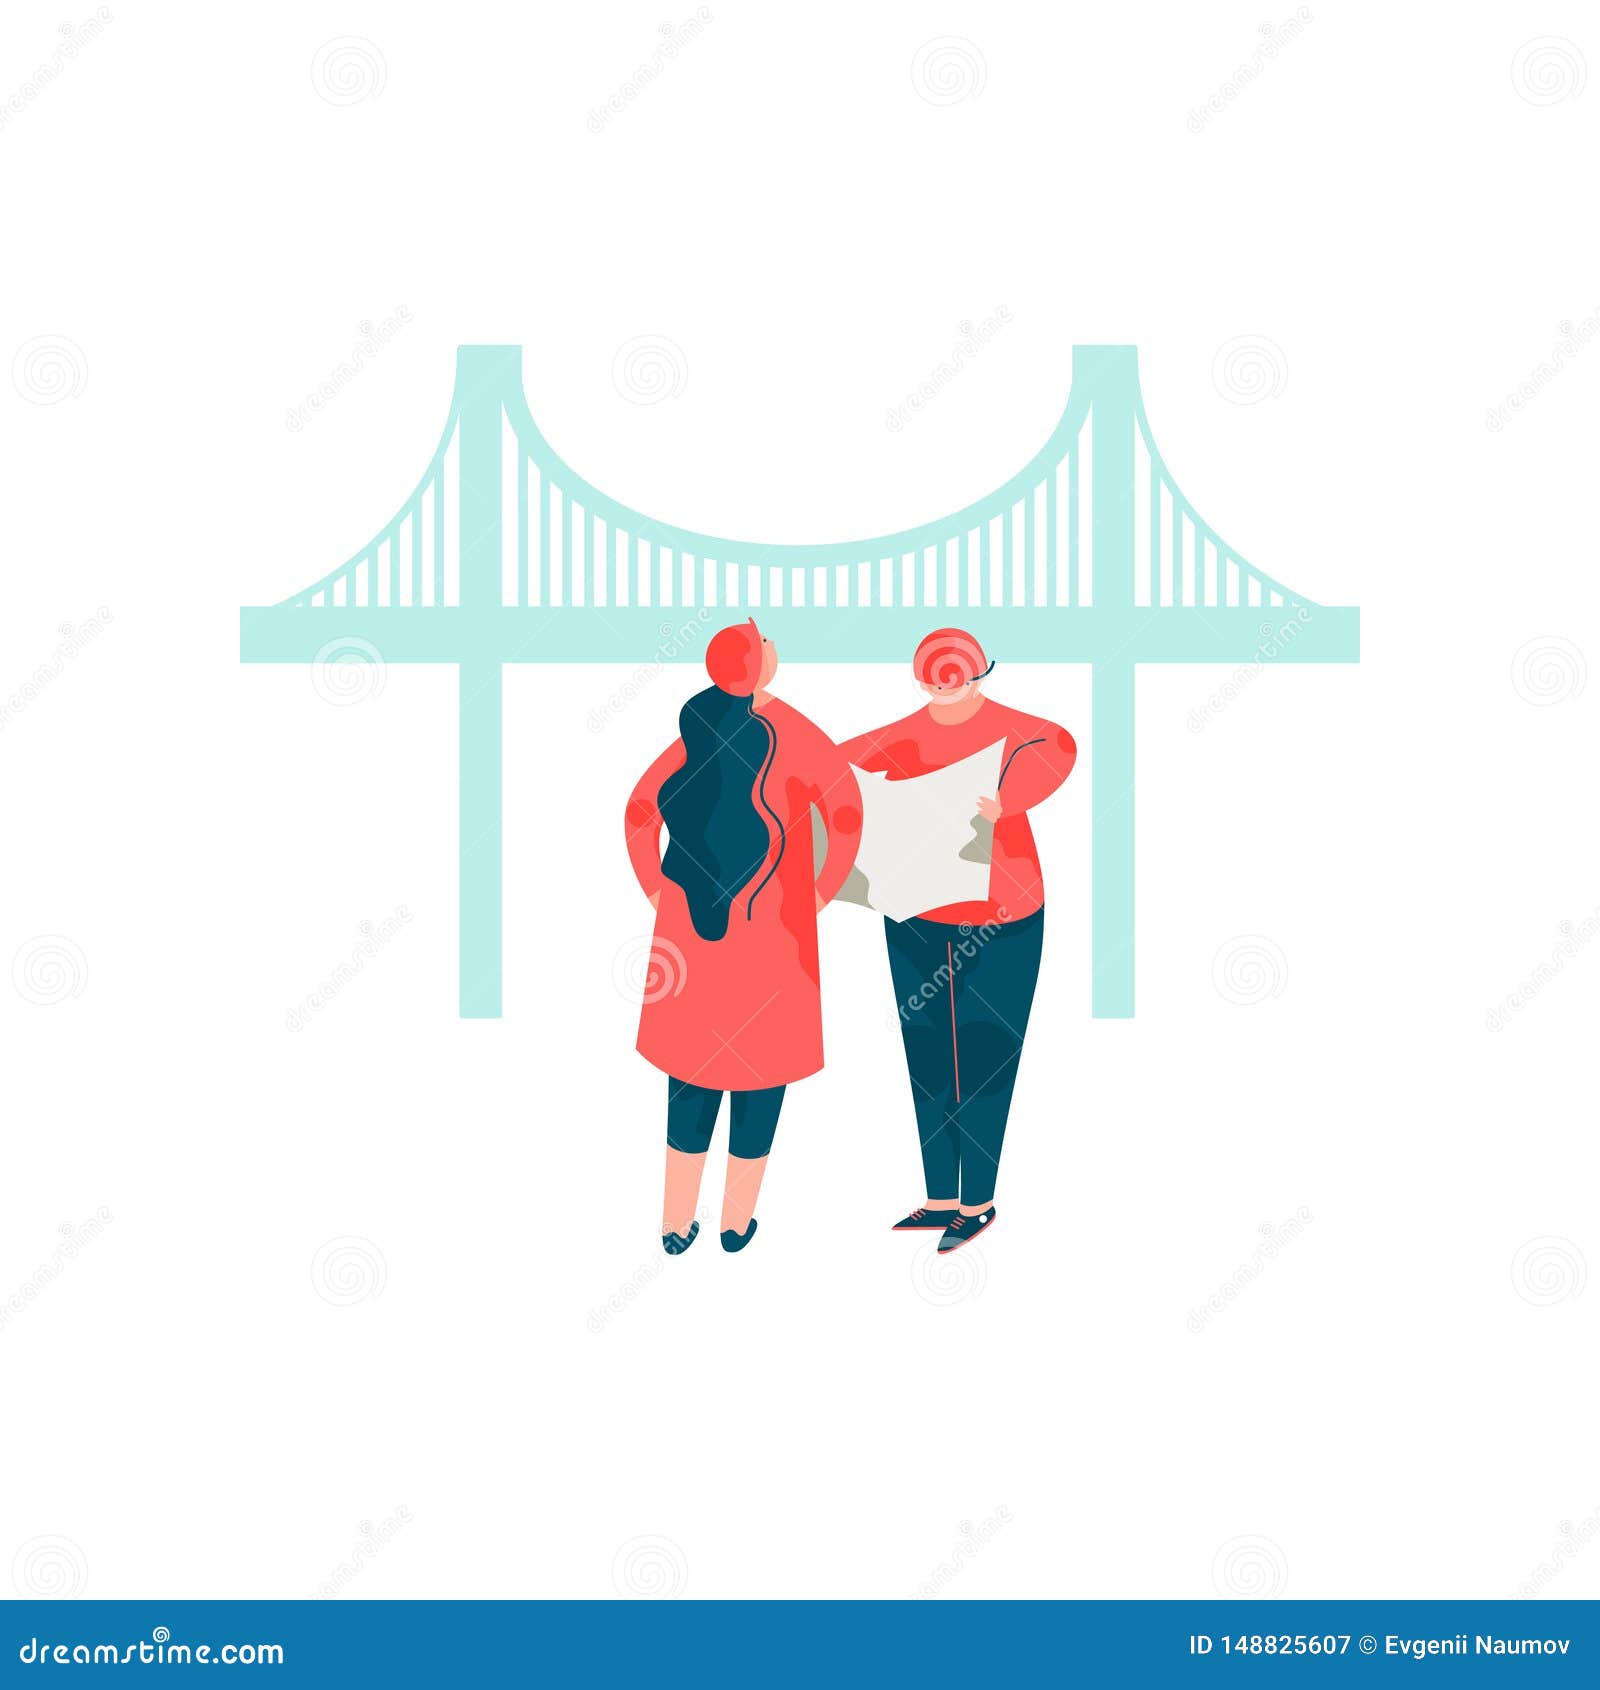 Architects Discussing the Bridge Project, Male and Female Professional Engineers Characters Vector Illustration on White Background.